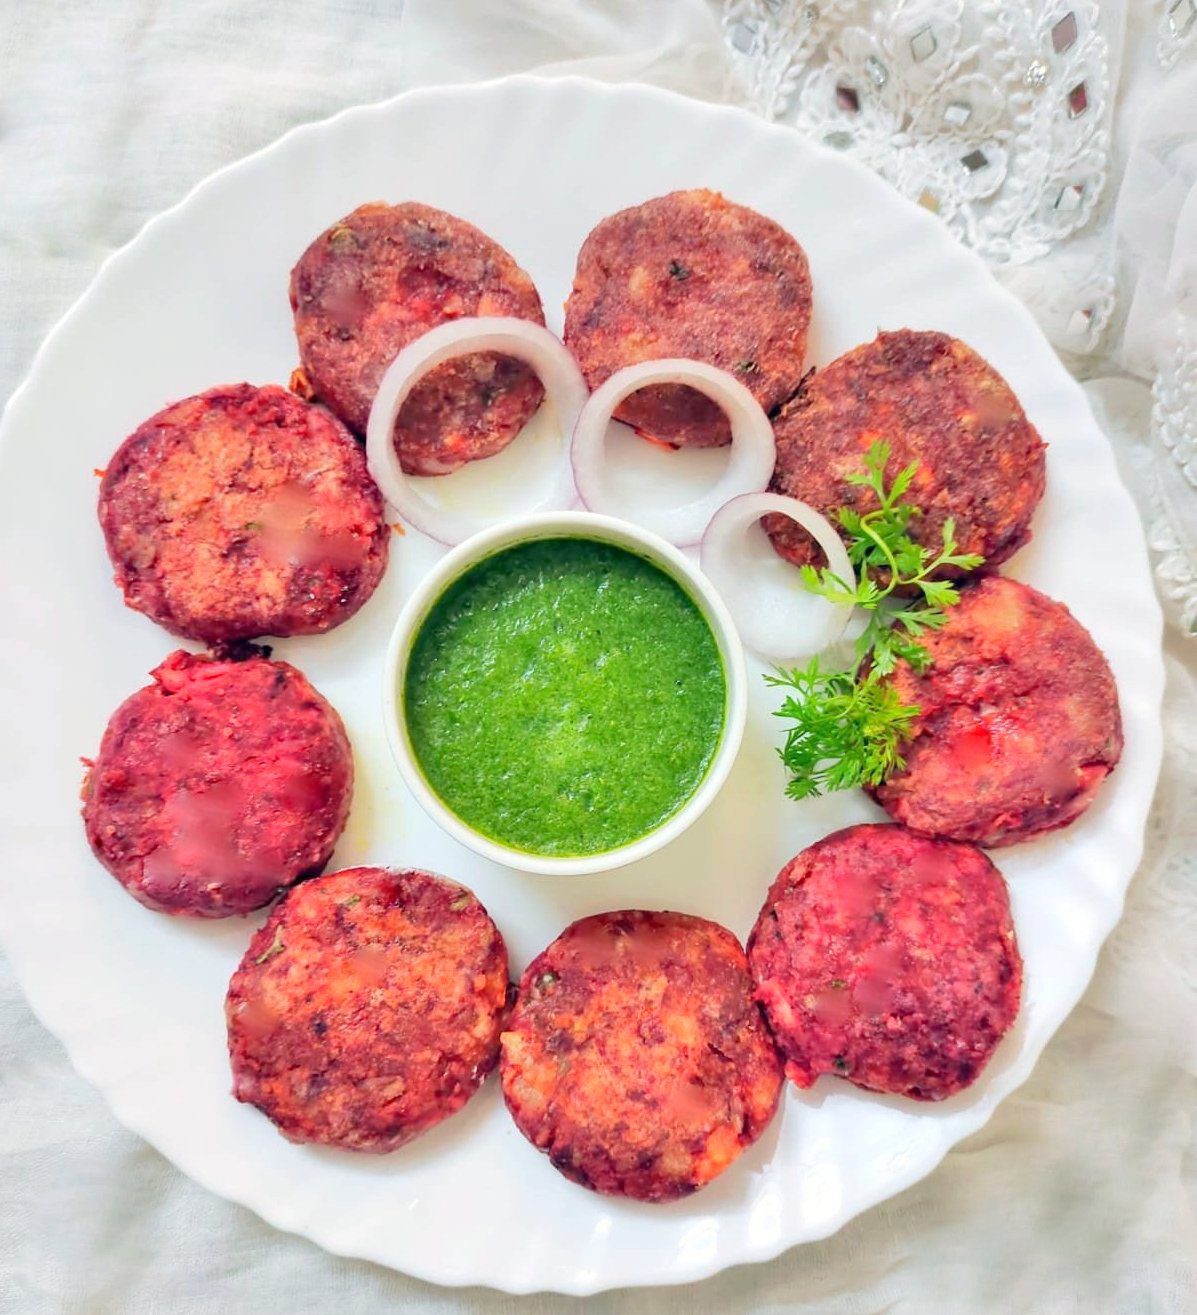 Pink Tofu Cutlets are a healthy and good source of iron and folate